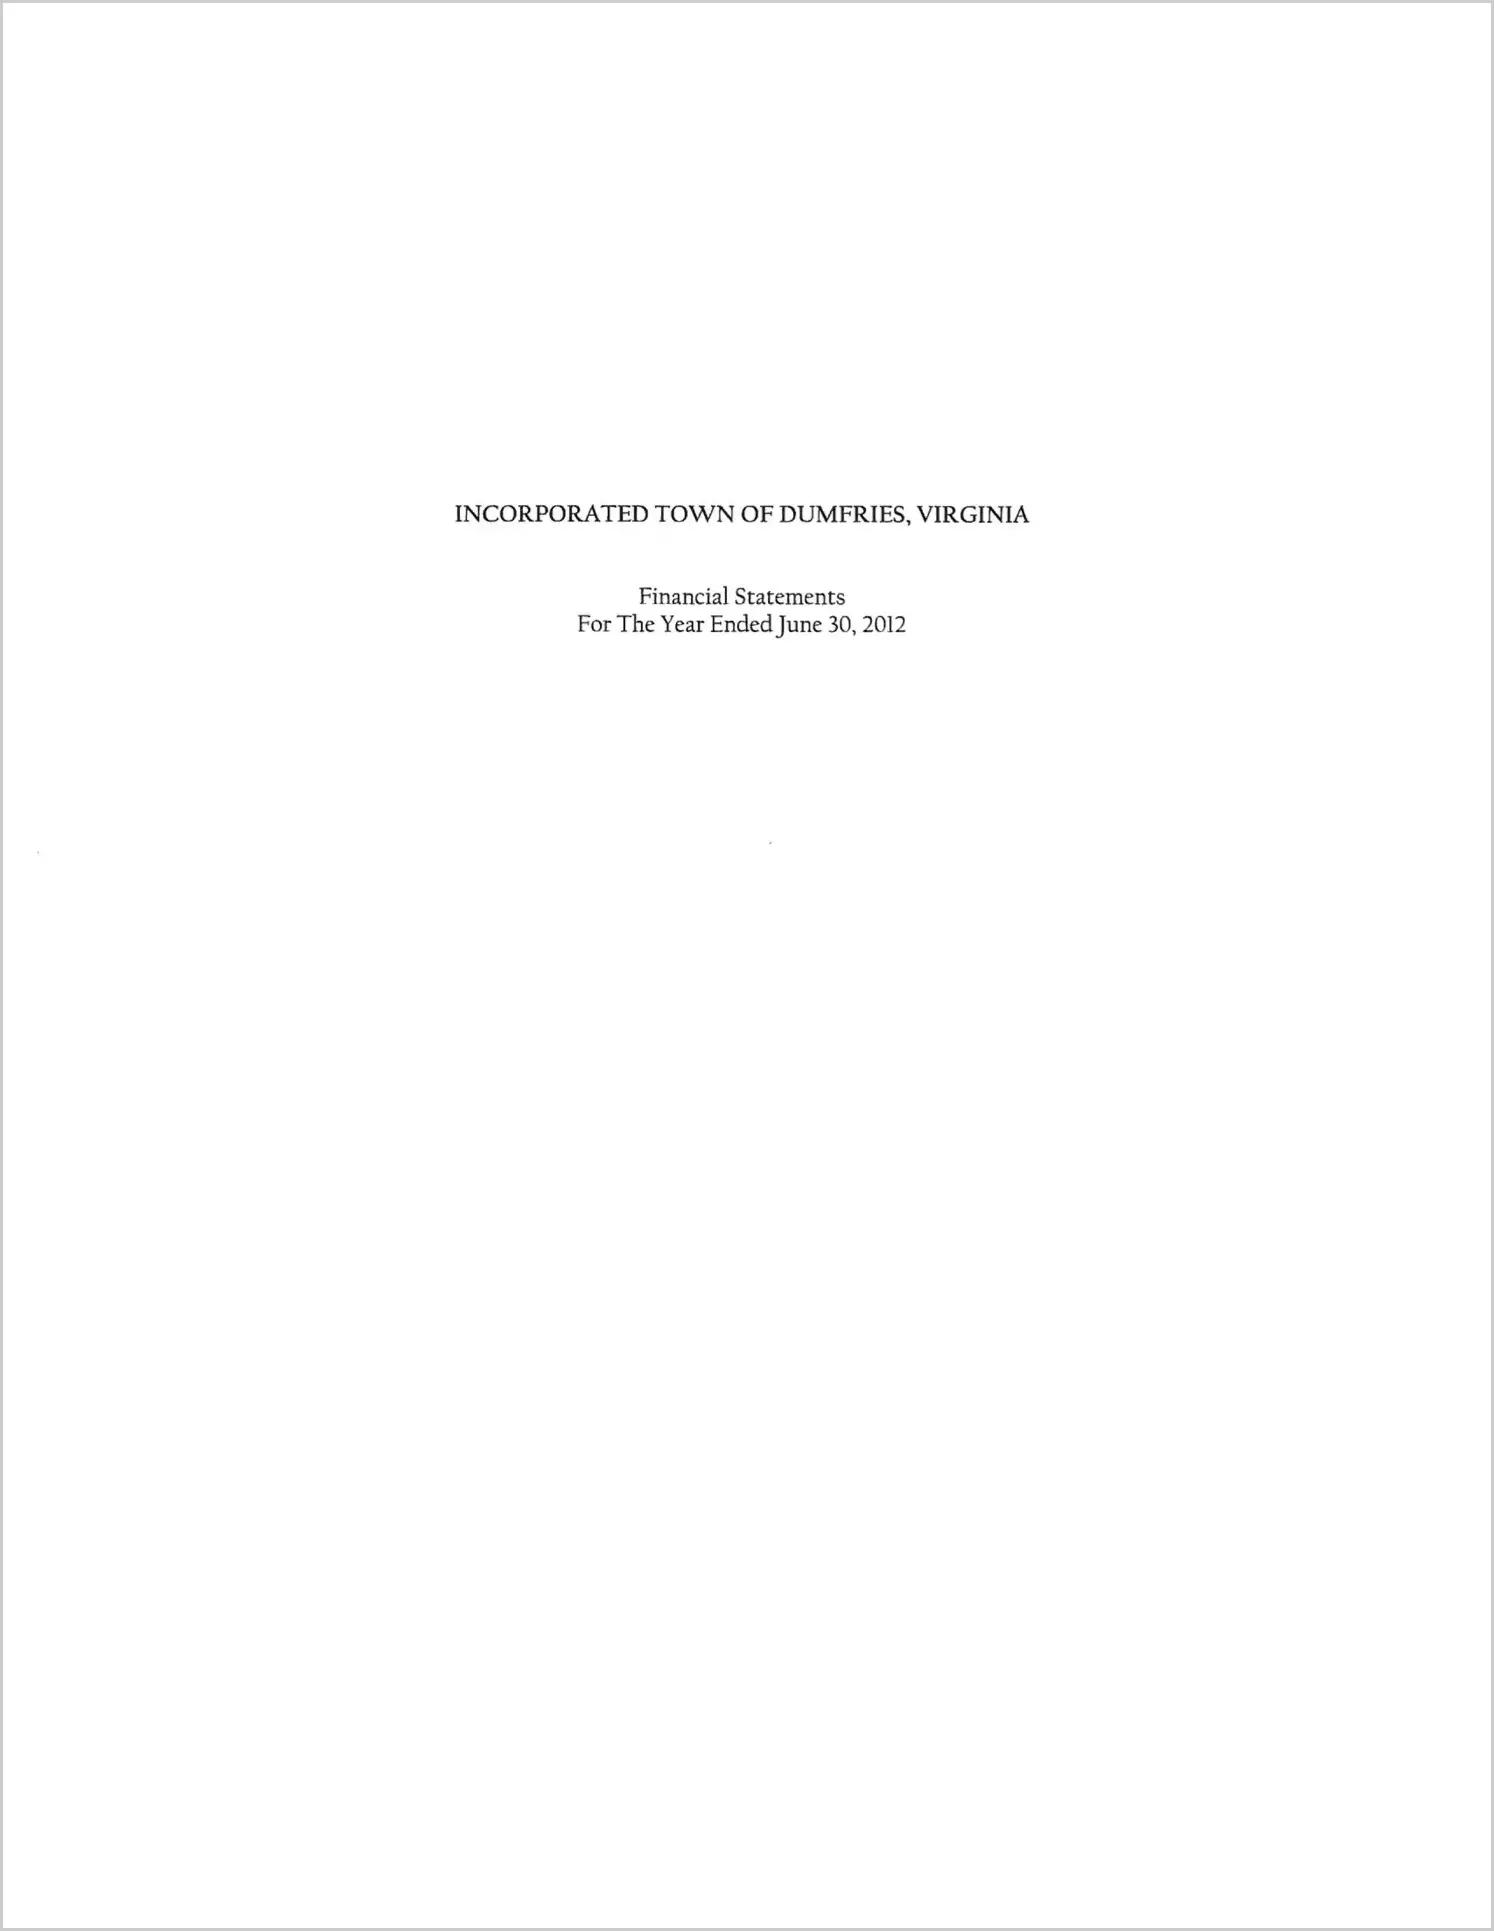 2012 Annual Financial Report for Town of Dumfries